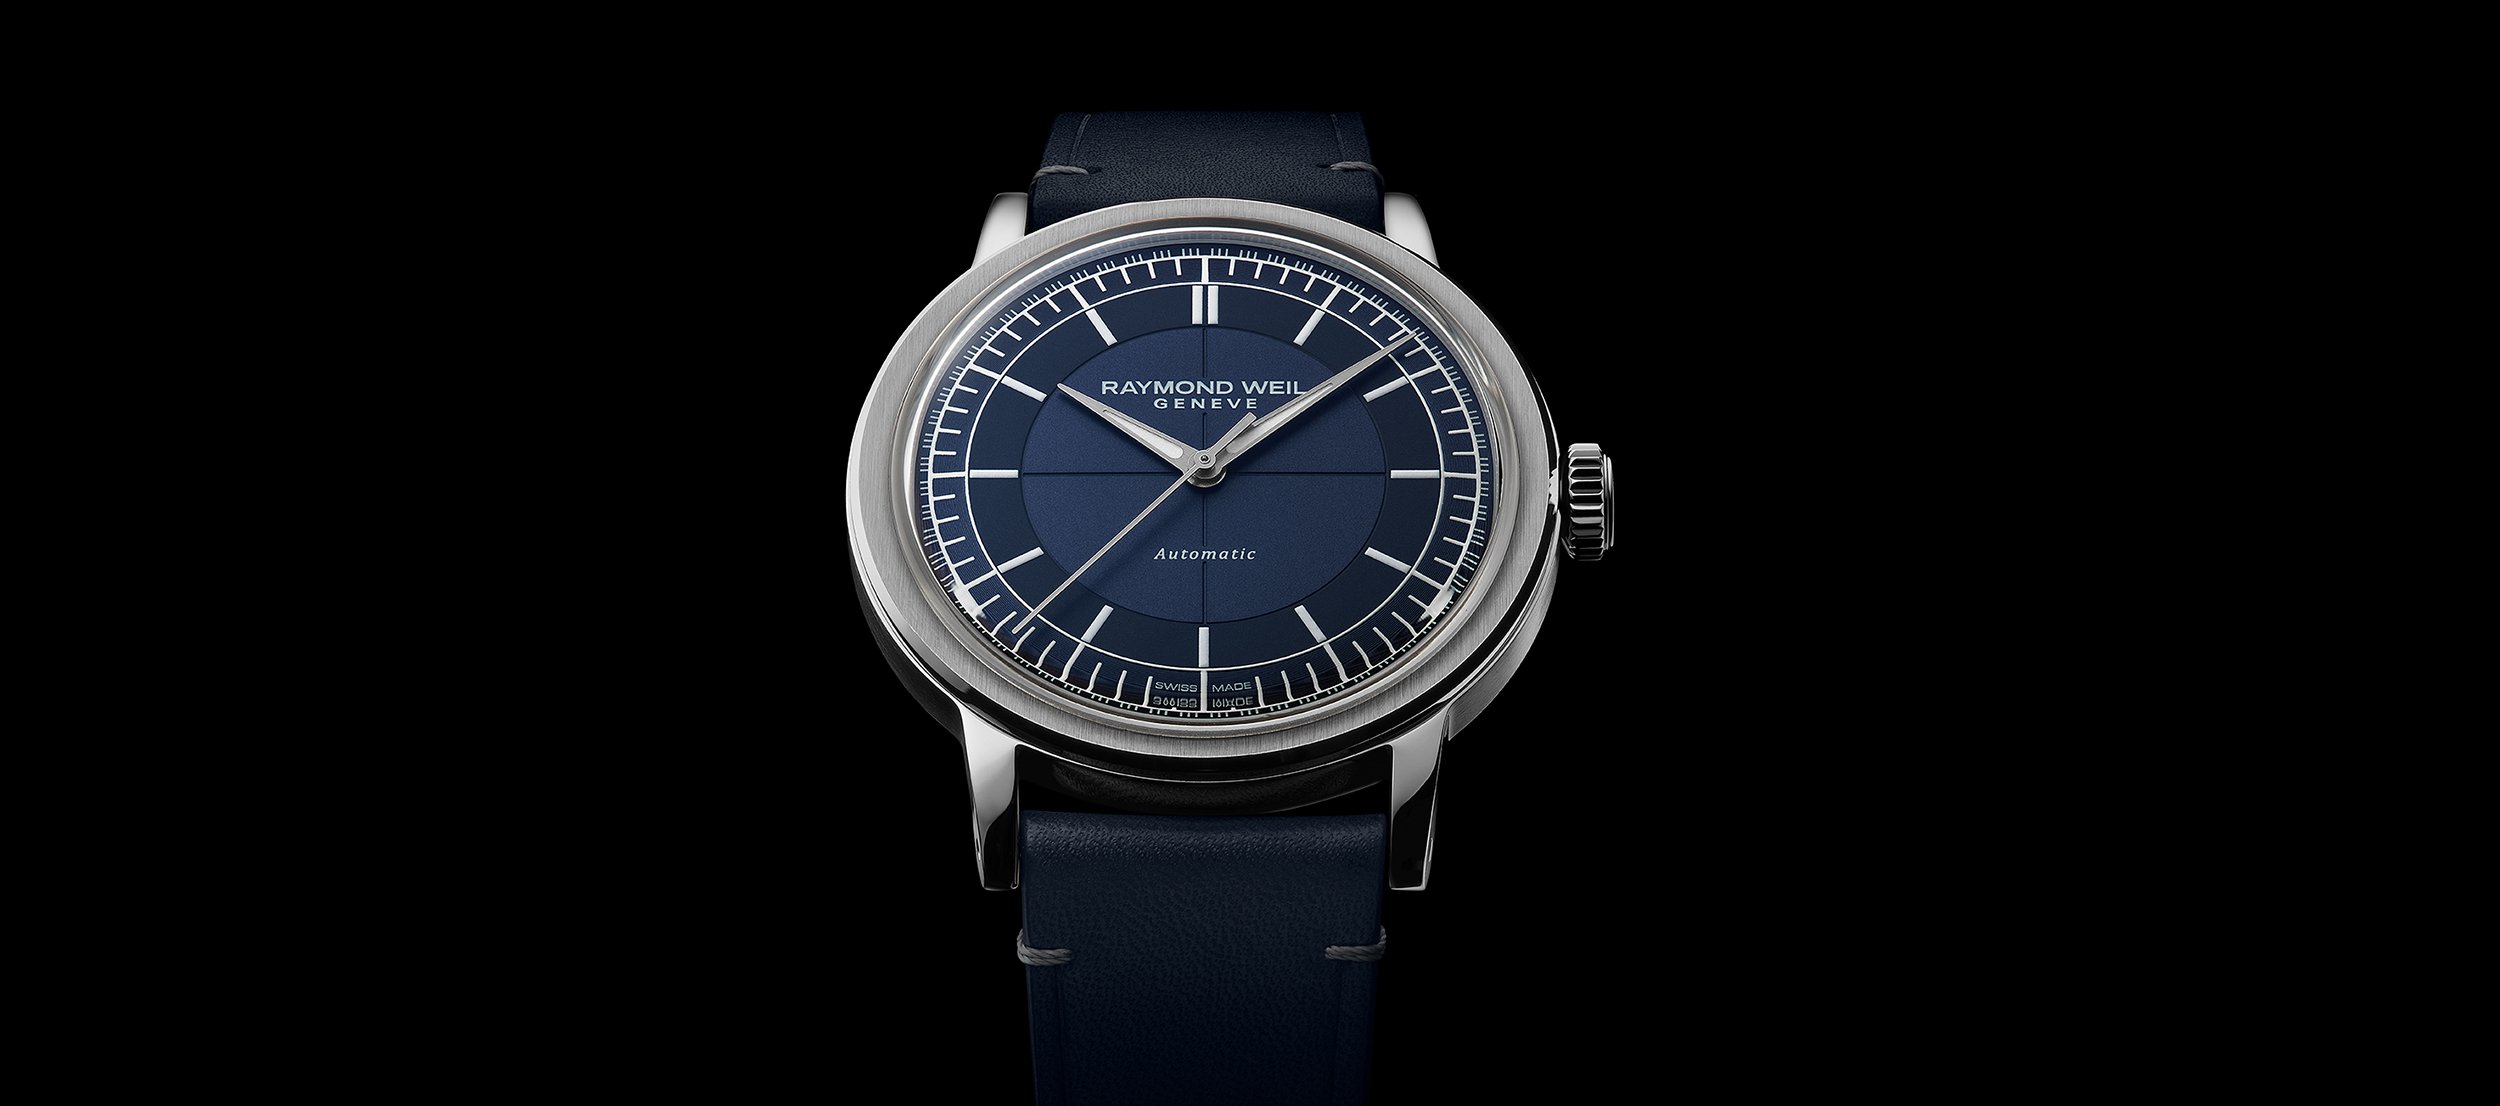 Men's Automatic Blue Leather Strap Watch - Millesime | RAYMOND WEIL